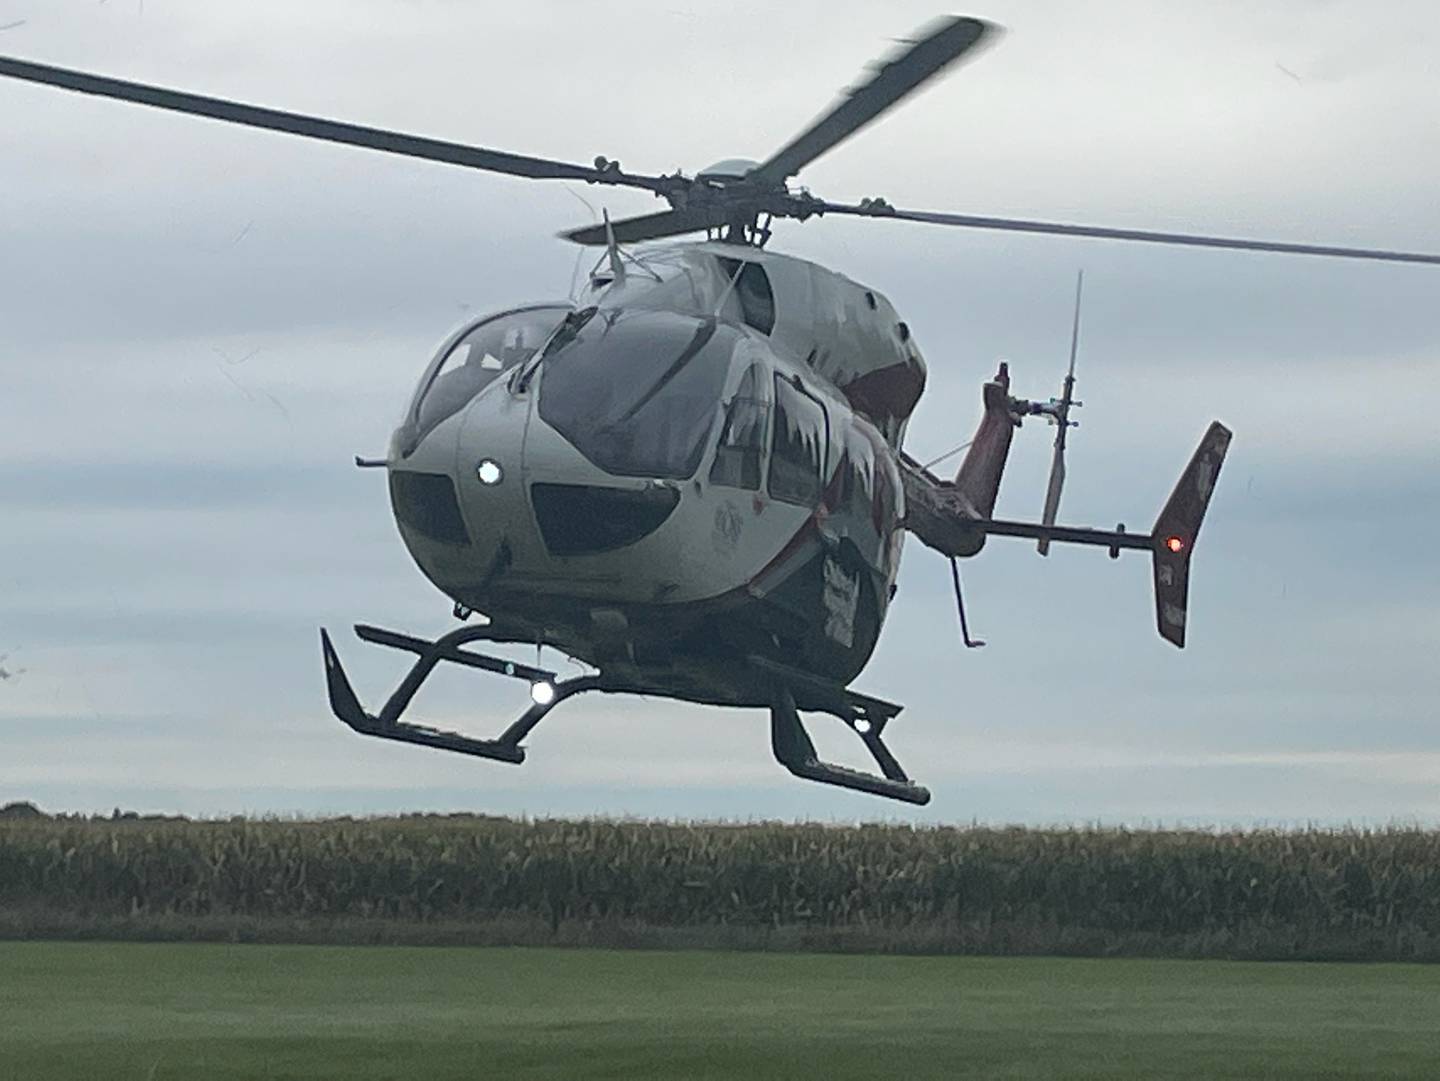 A Life Flight helicopter leaves the scene in Utica on Friday, Sept. 23, 2022, after a woman was extricated from an industrial conveyer belt.